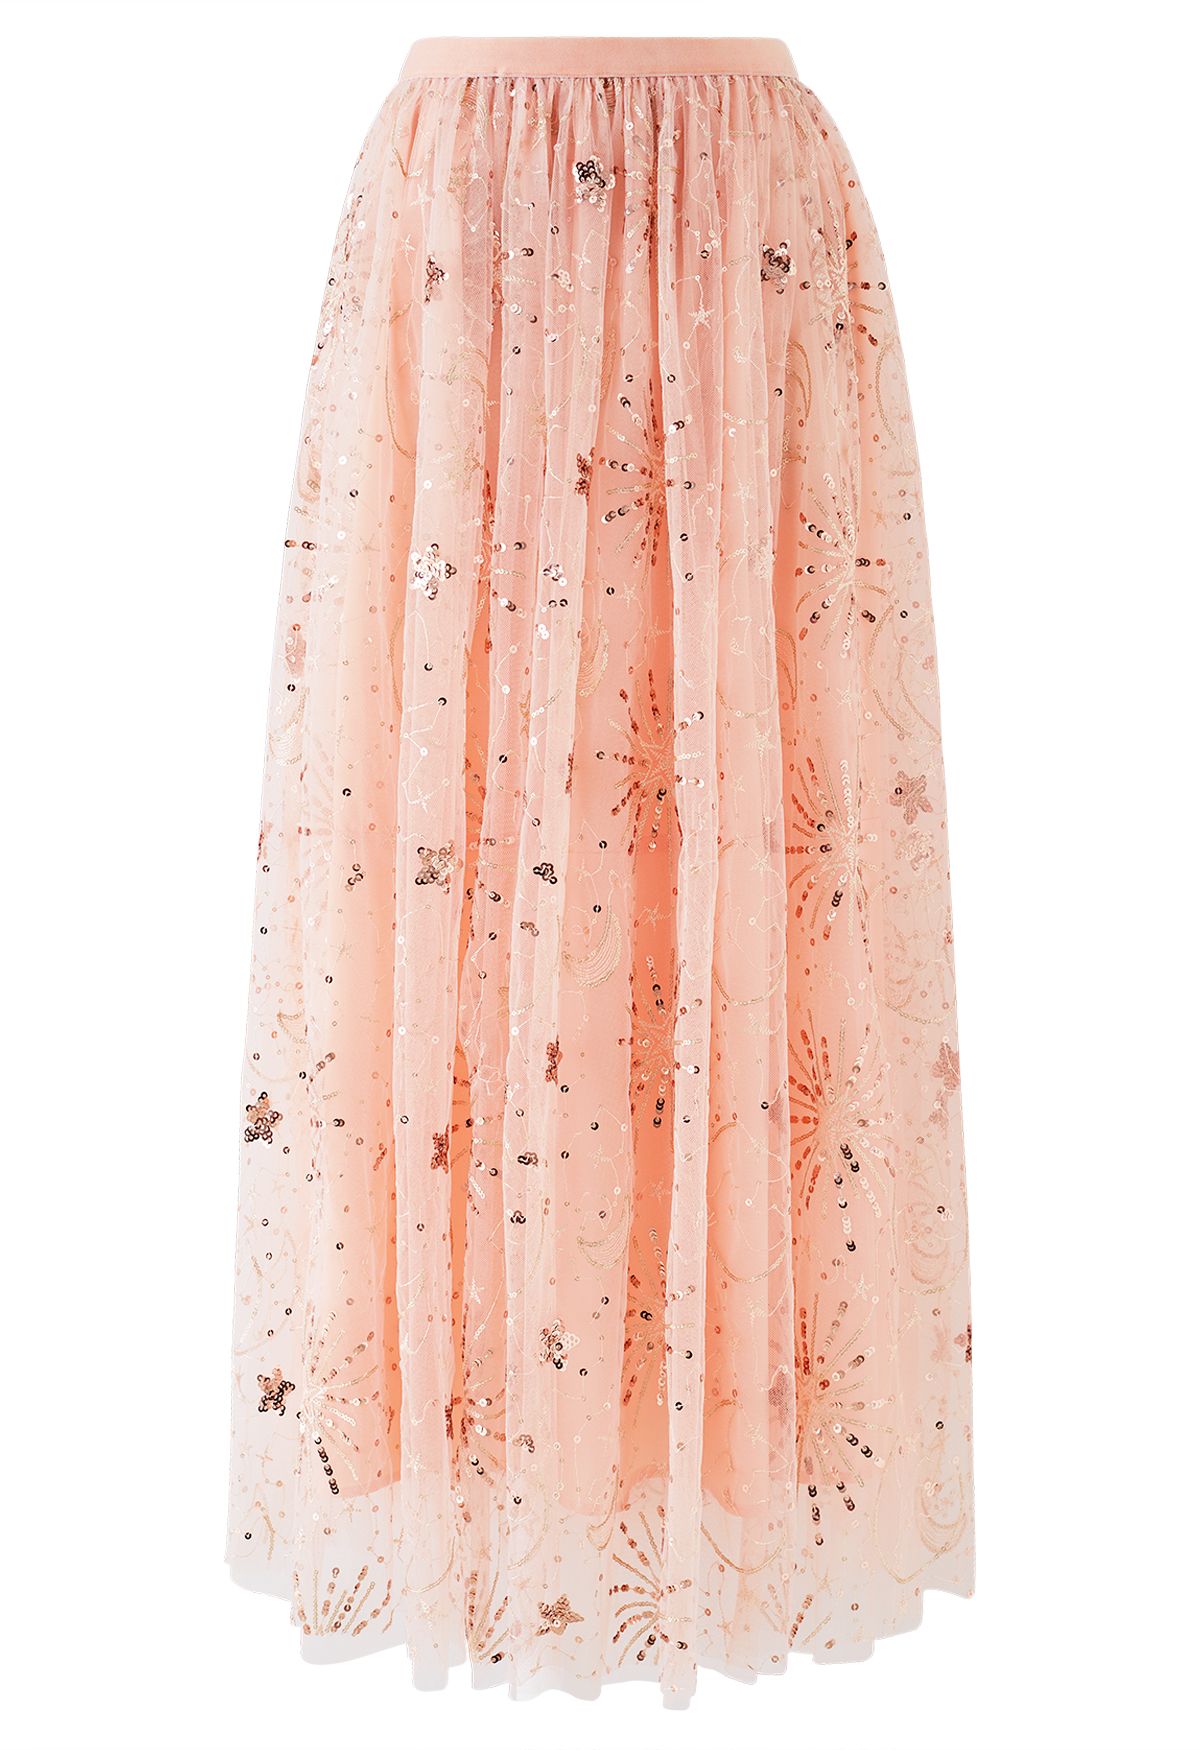 Moon and Star Sequin-Embellished Tulle Maxi Skirt in Apricot